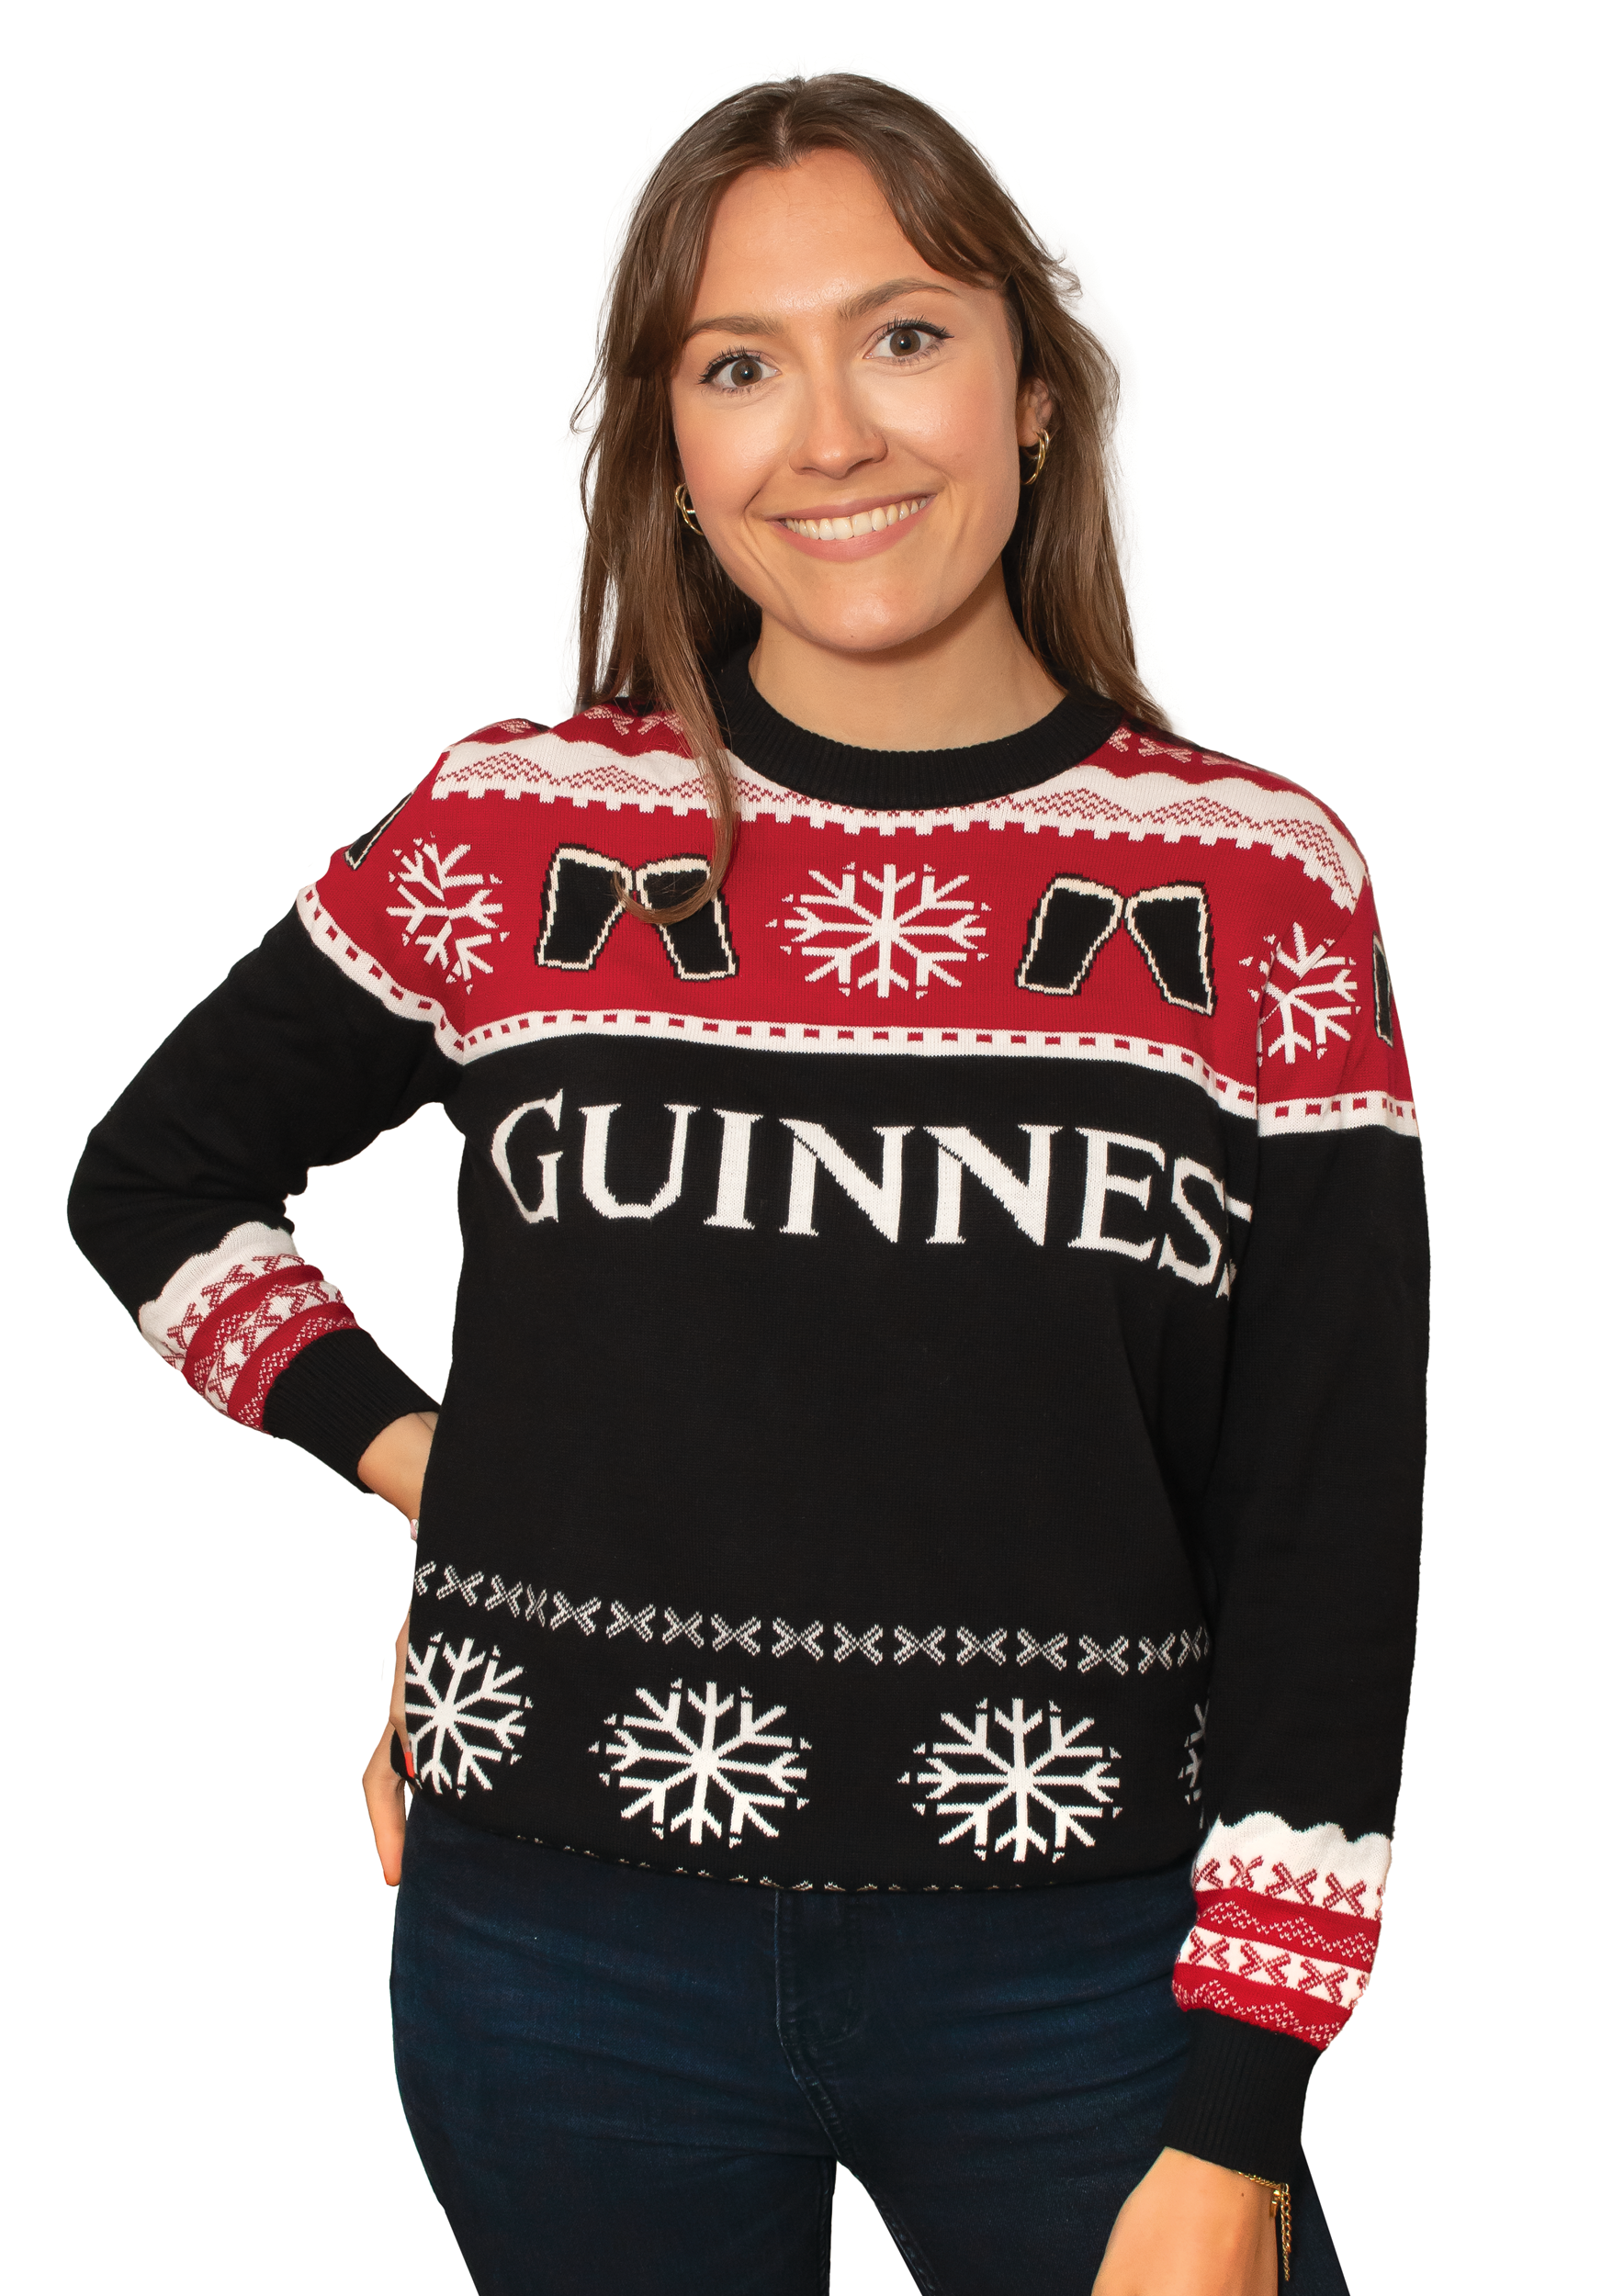 An Official Guinness Holiday Sweater, perfect for festive Guinness enthusiasts.